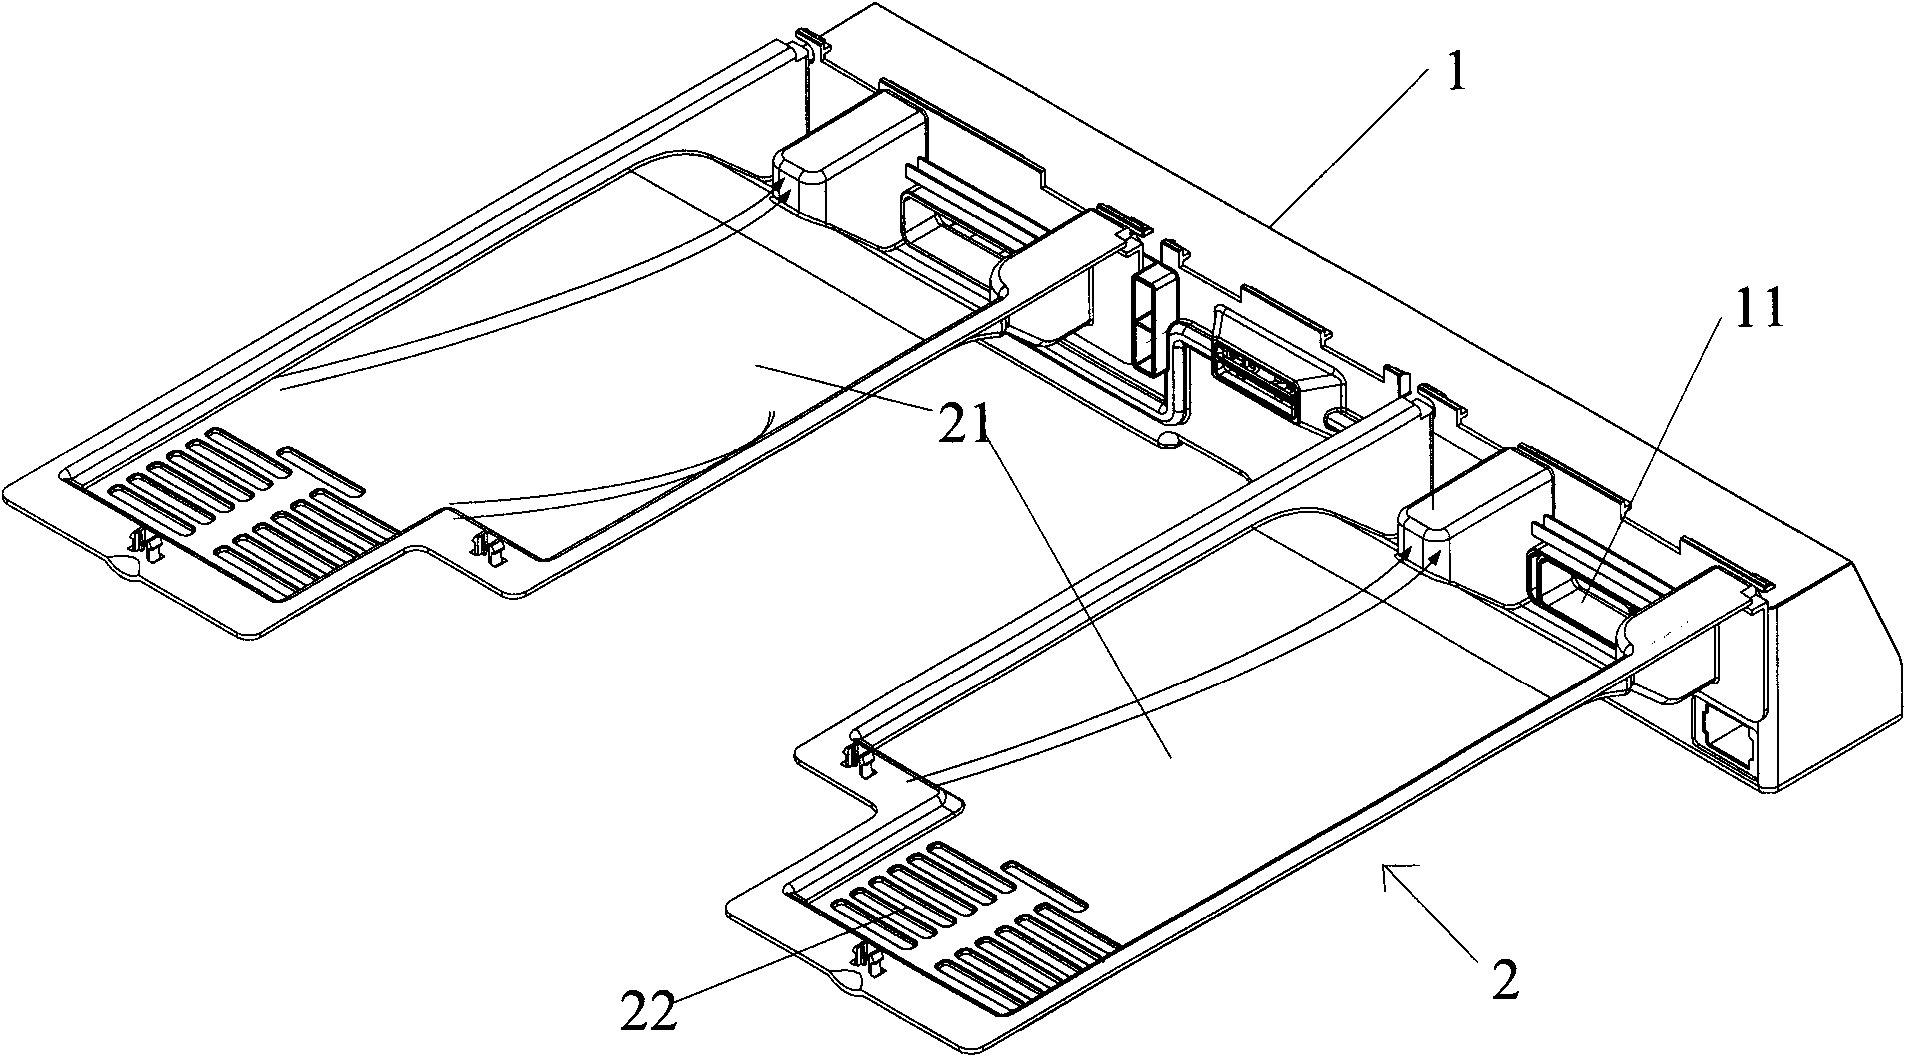 Air duct device of drawer type storeroom and refrigerator comprising same